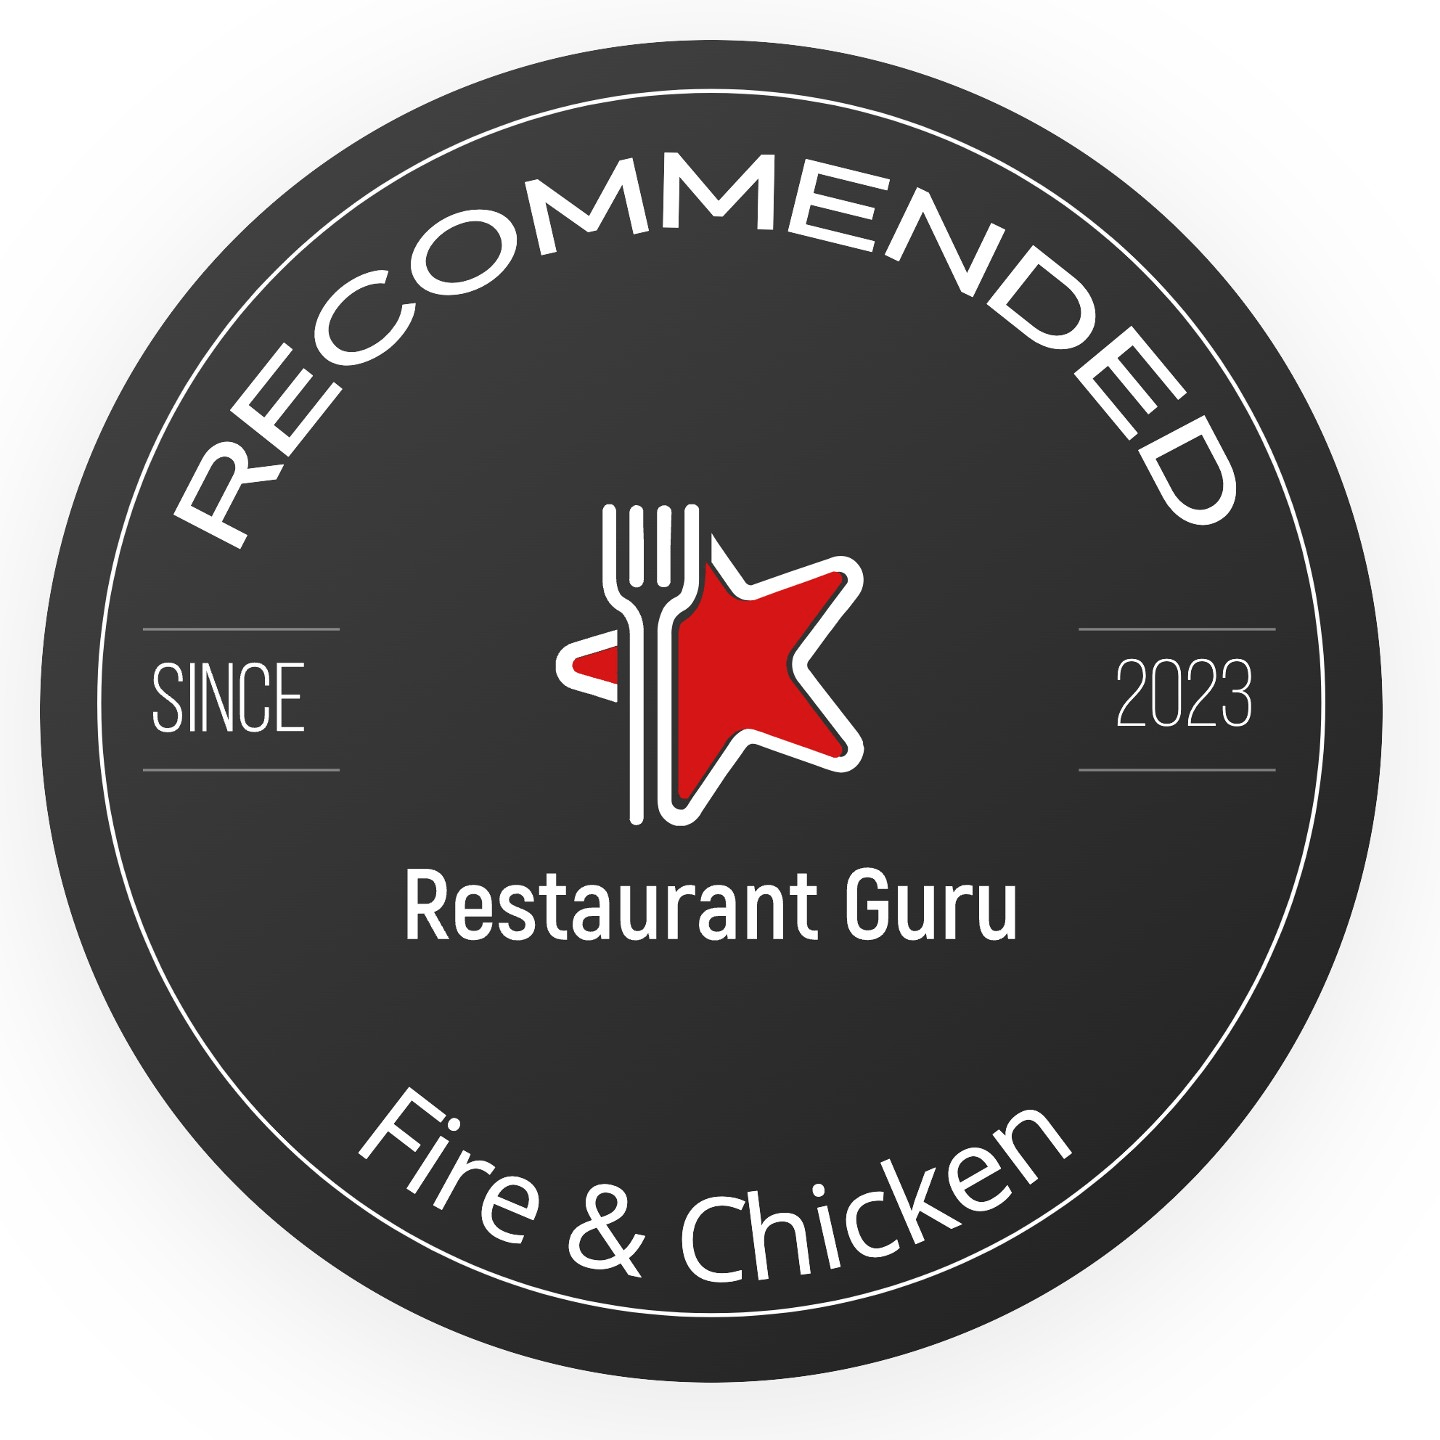 Recommended by Restaurant Guru!